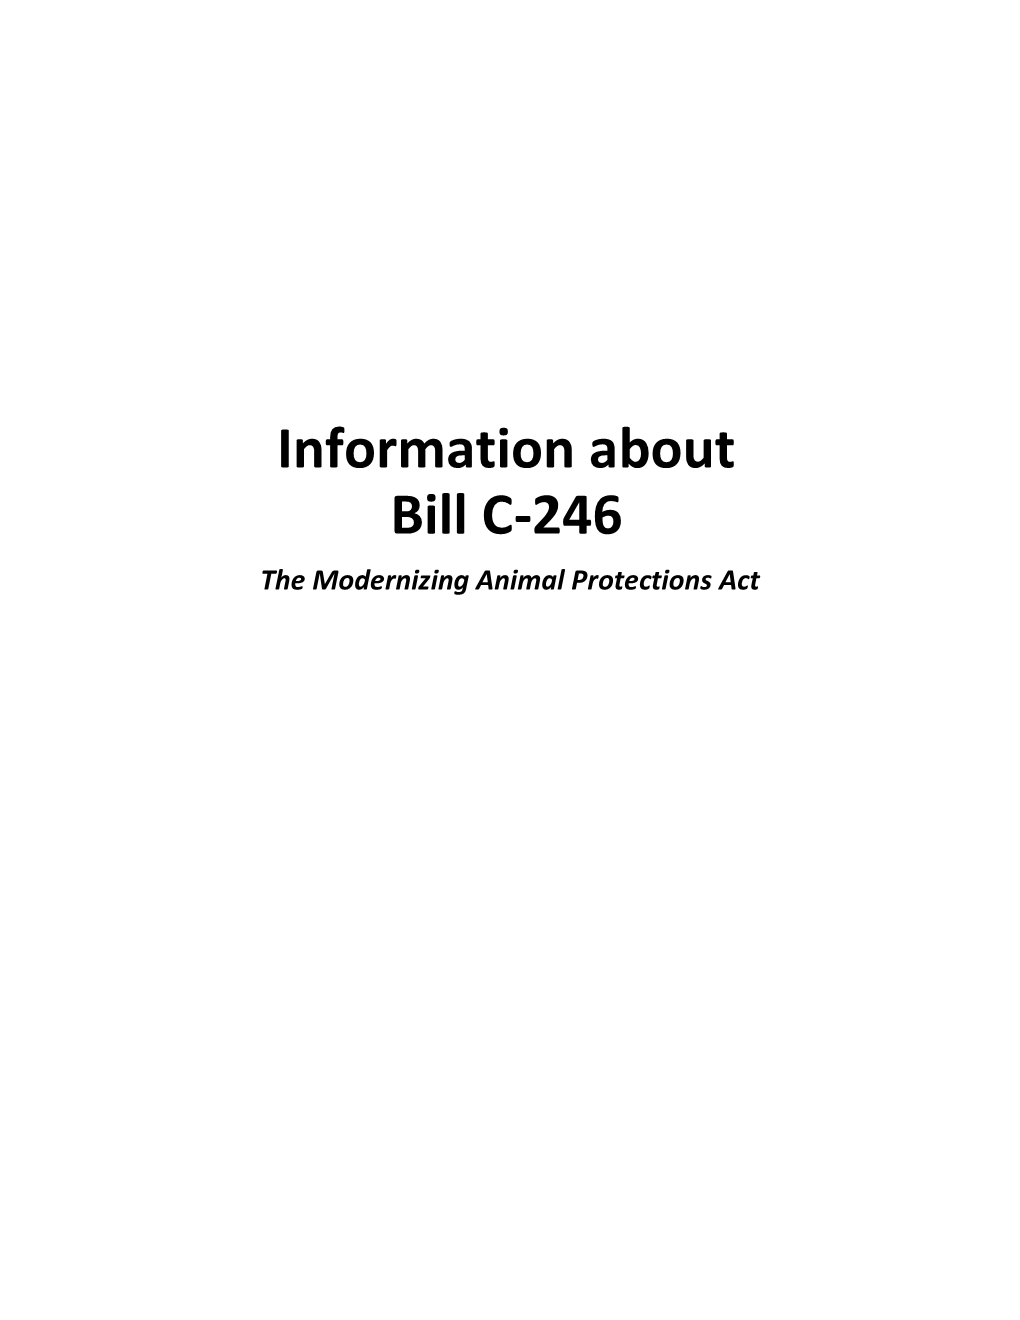 Information About Bill C-246